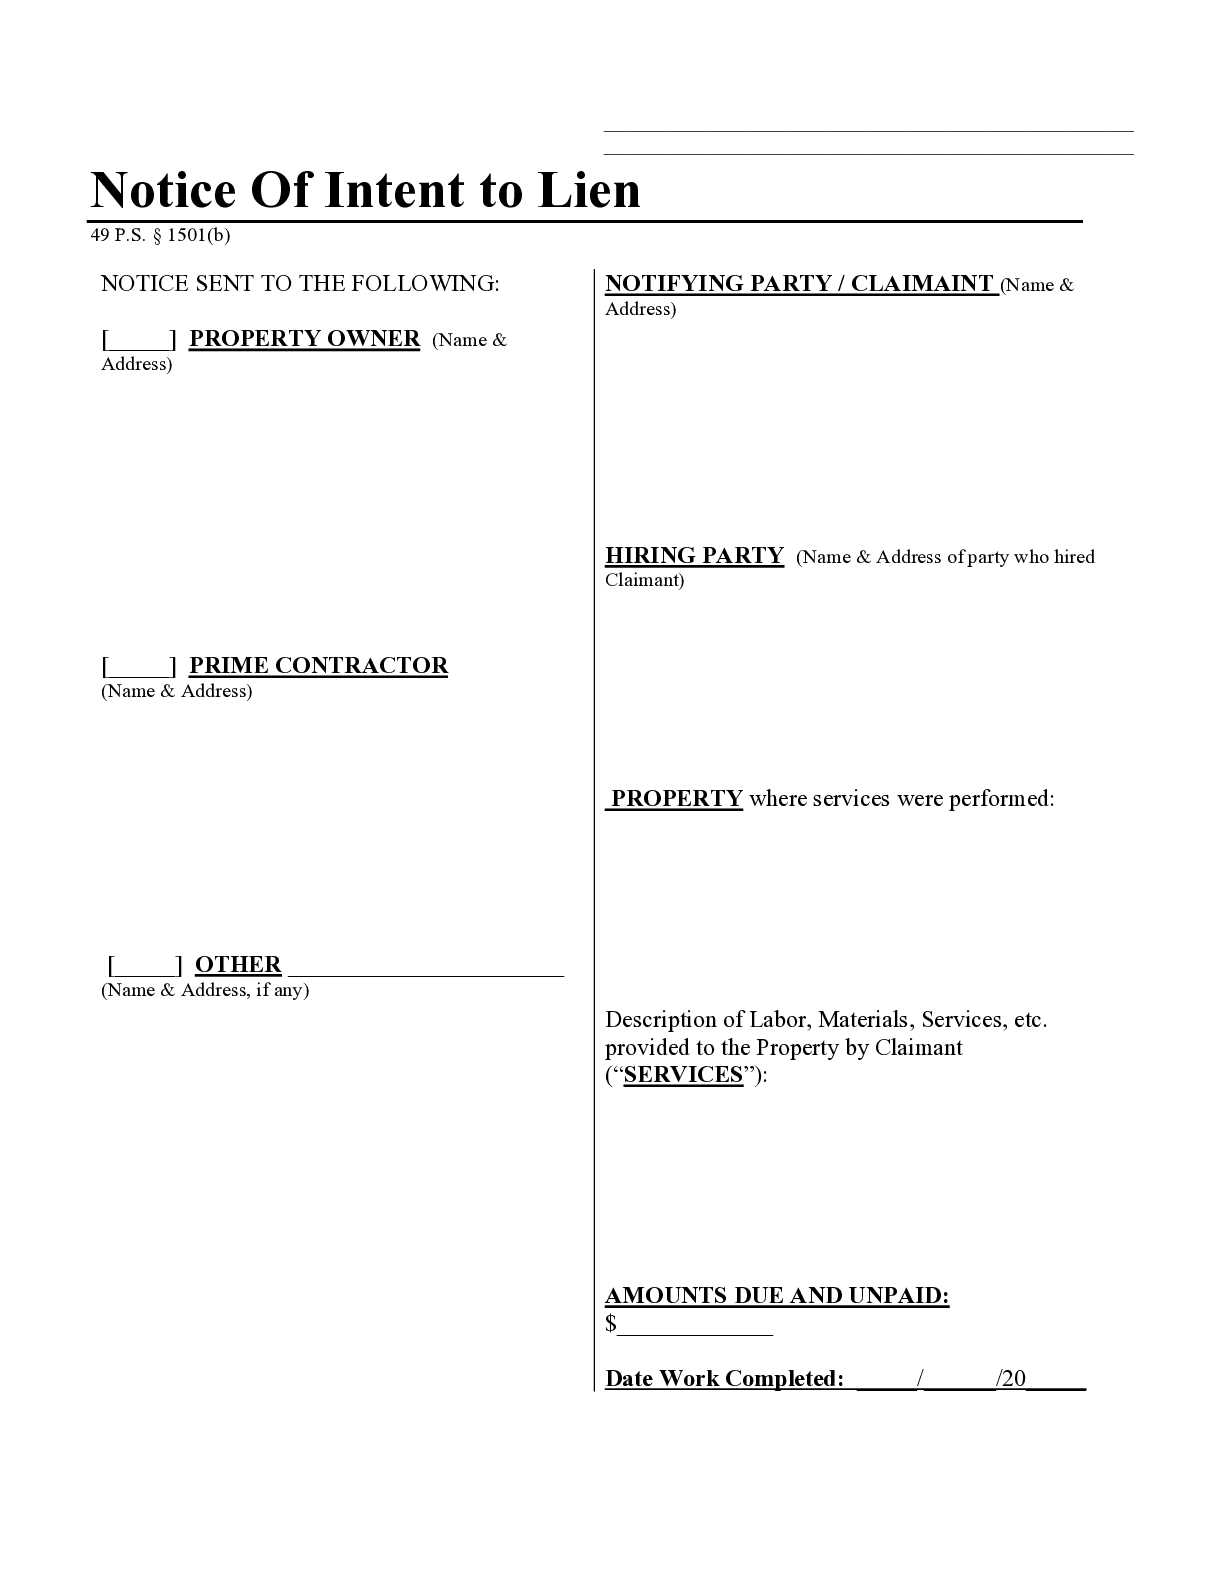 Pennsylvania Notice of Intent to Lien Form | Free Downloadable Template